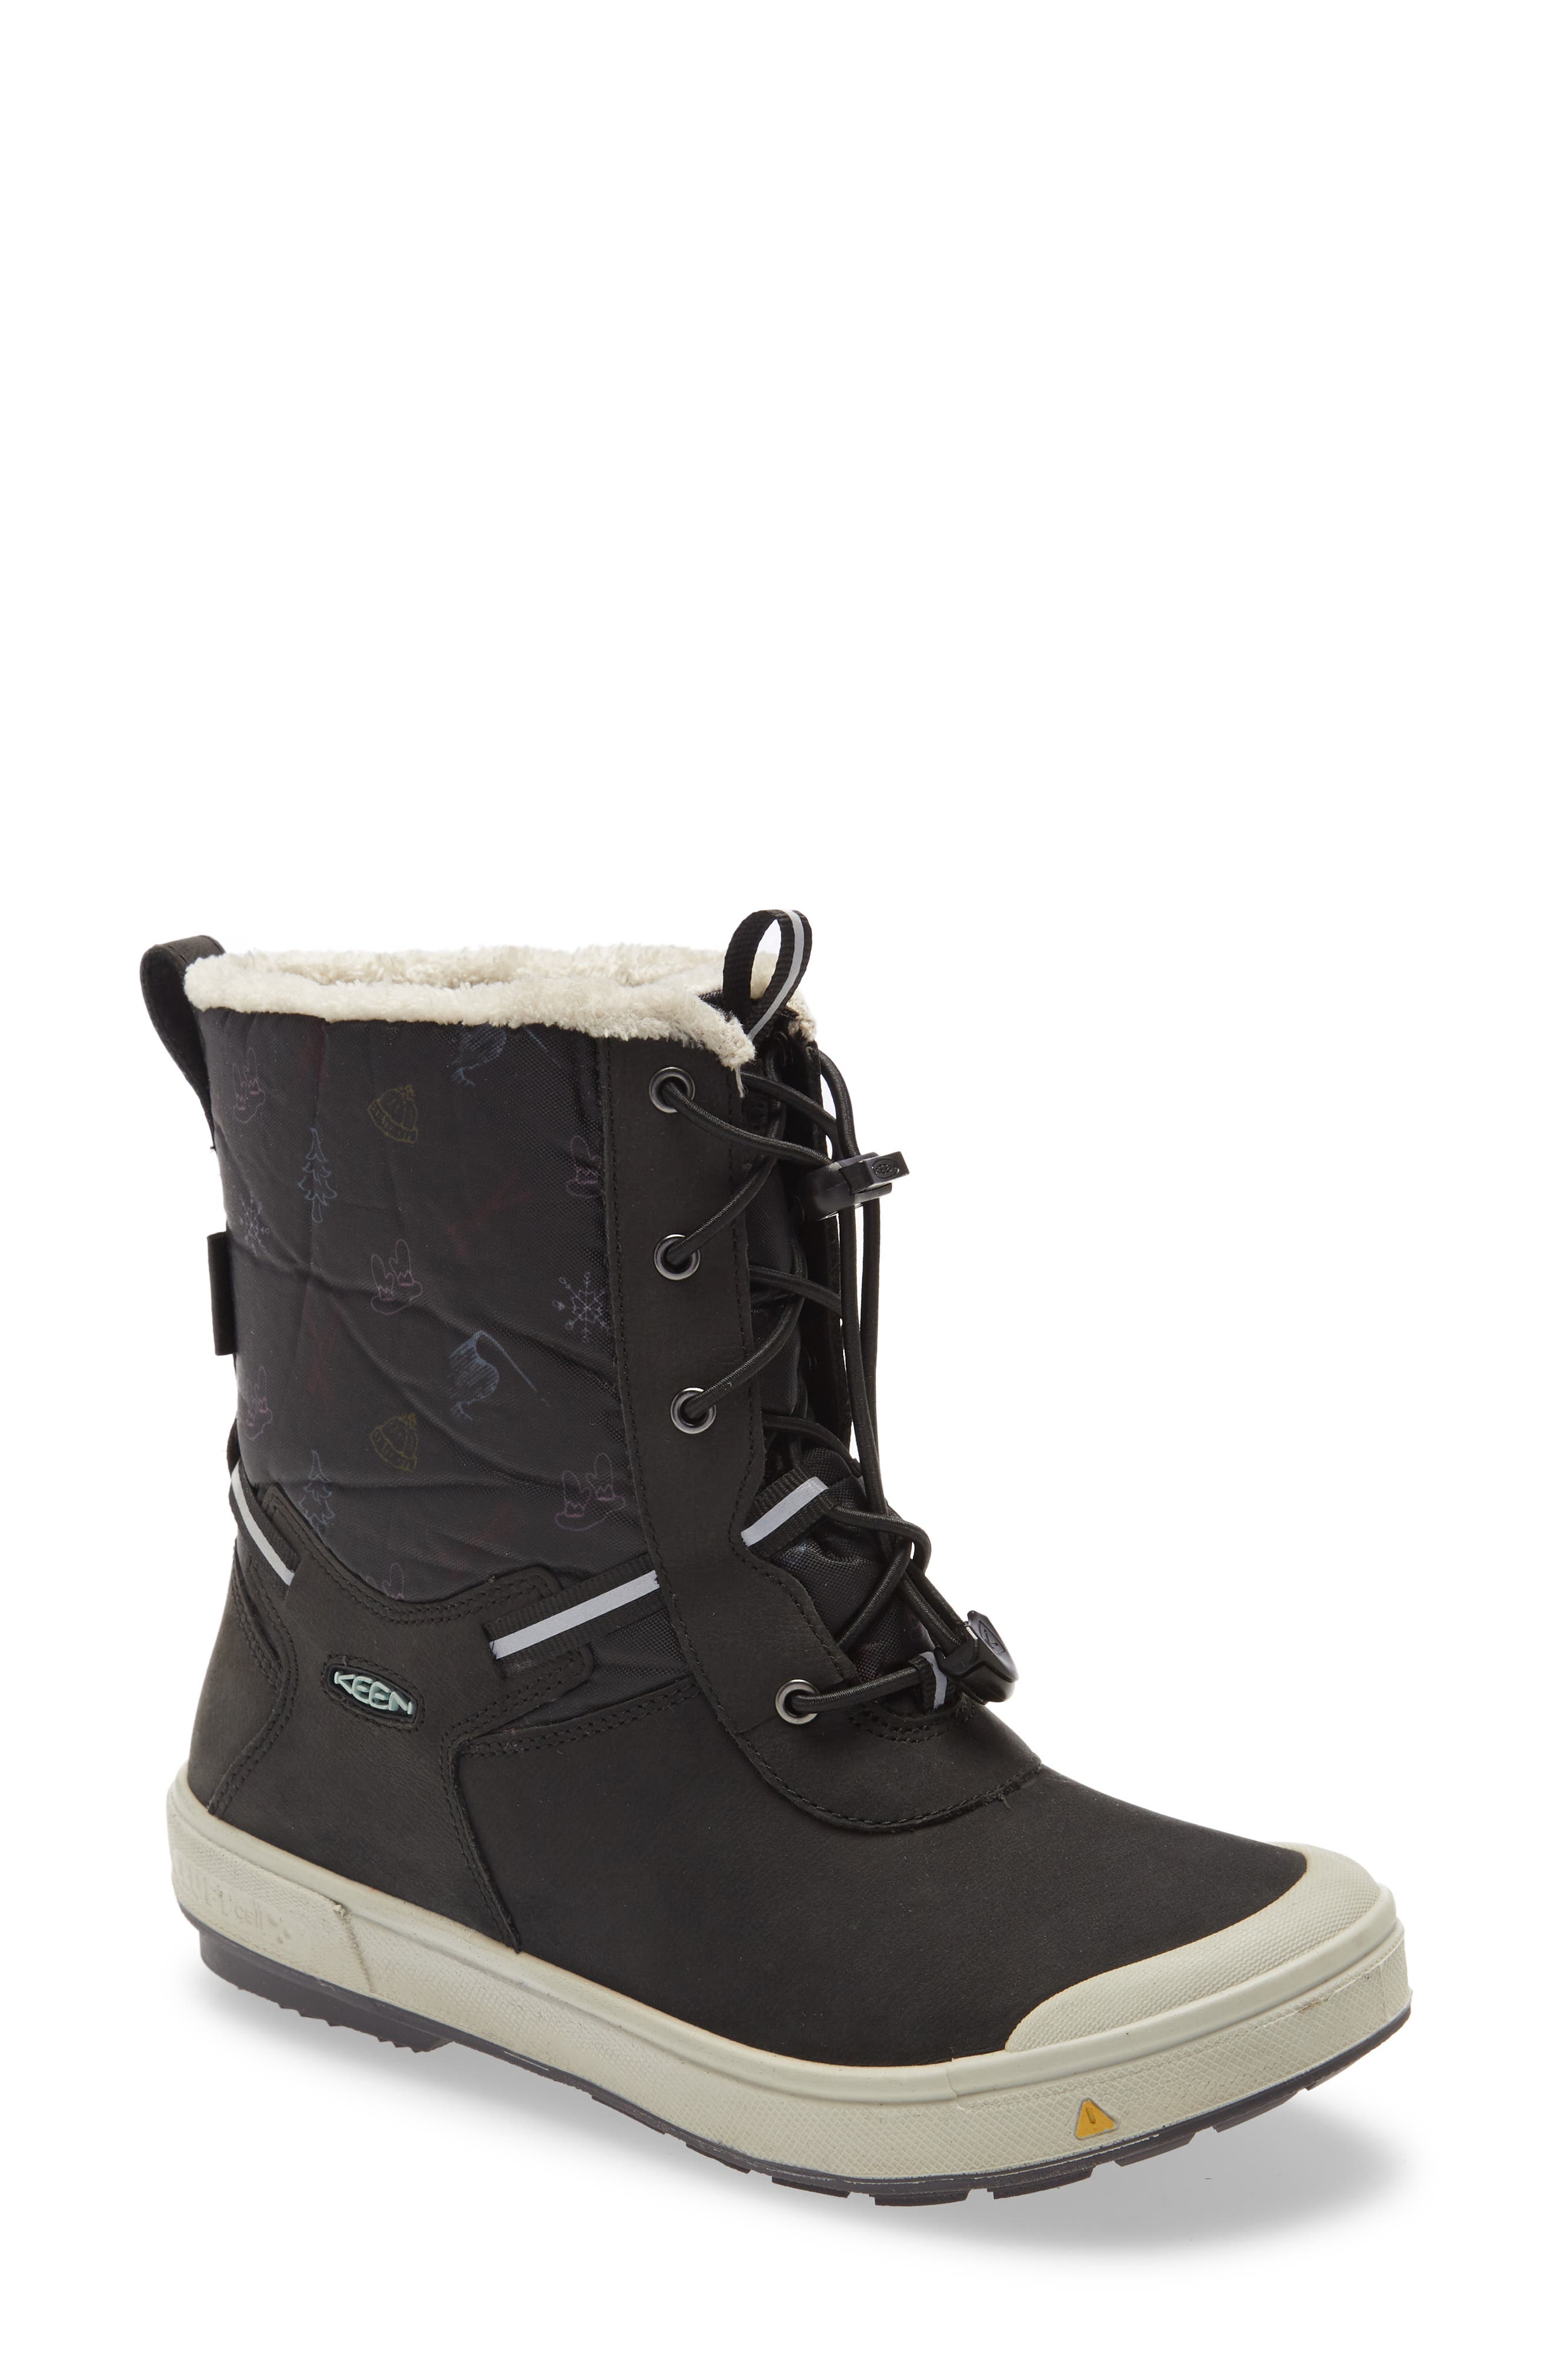 nordstrom boys boots